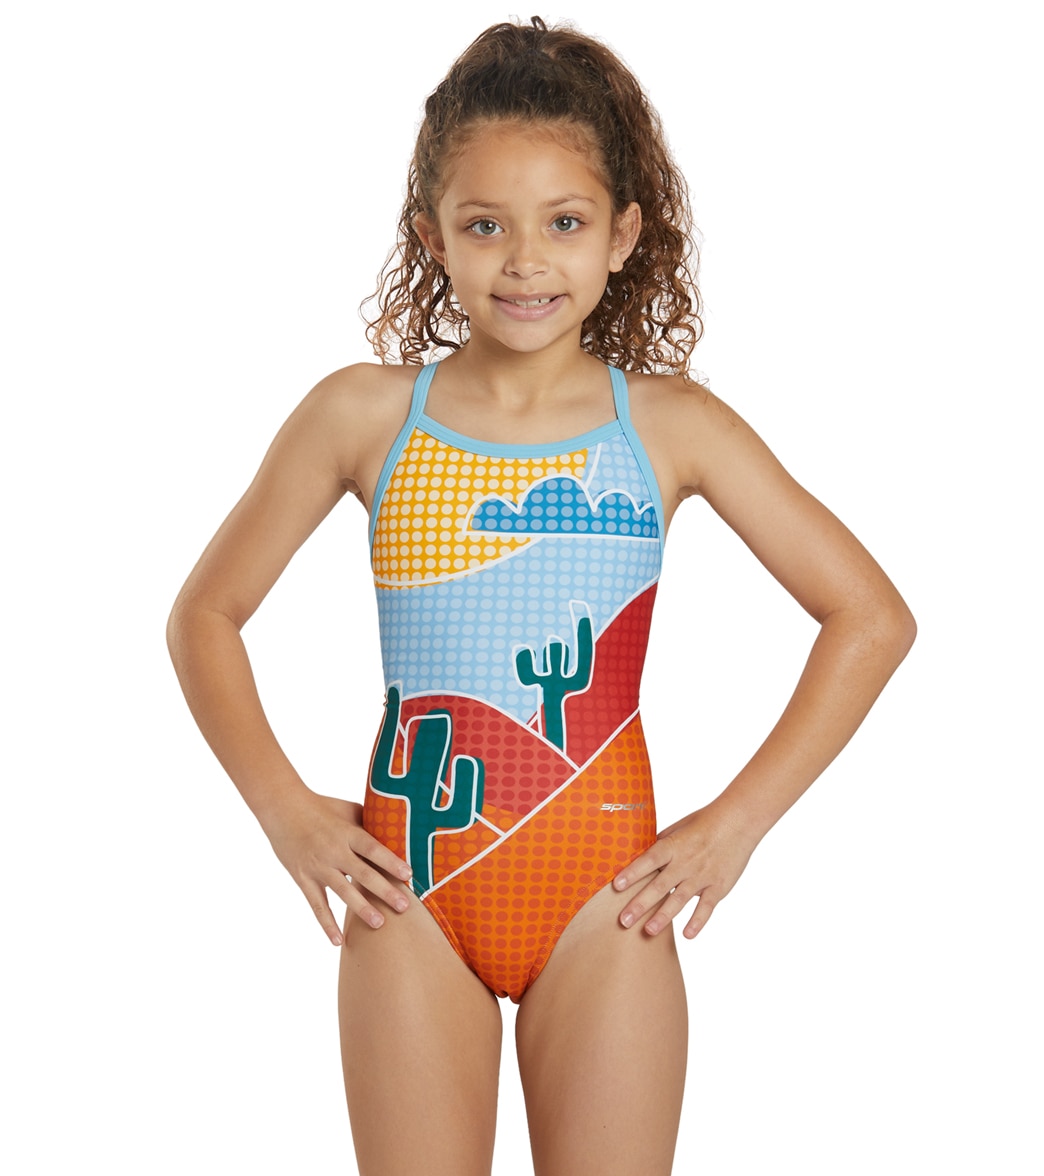 Sporti X Alilscribble Limited Edition Polka Dot Desert Thin Strap One Piece Swimsuit Youth 22-28 - Multi 22Y Polyester - Swimoutlet.com